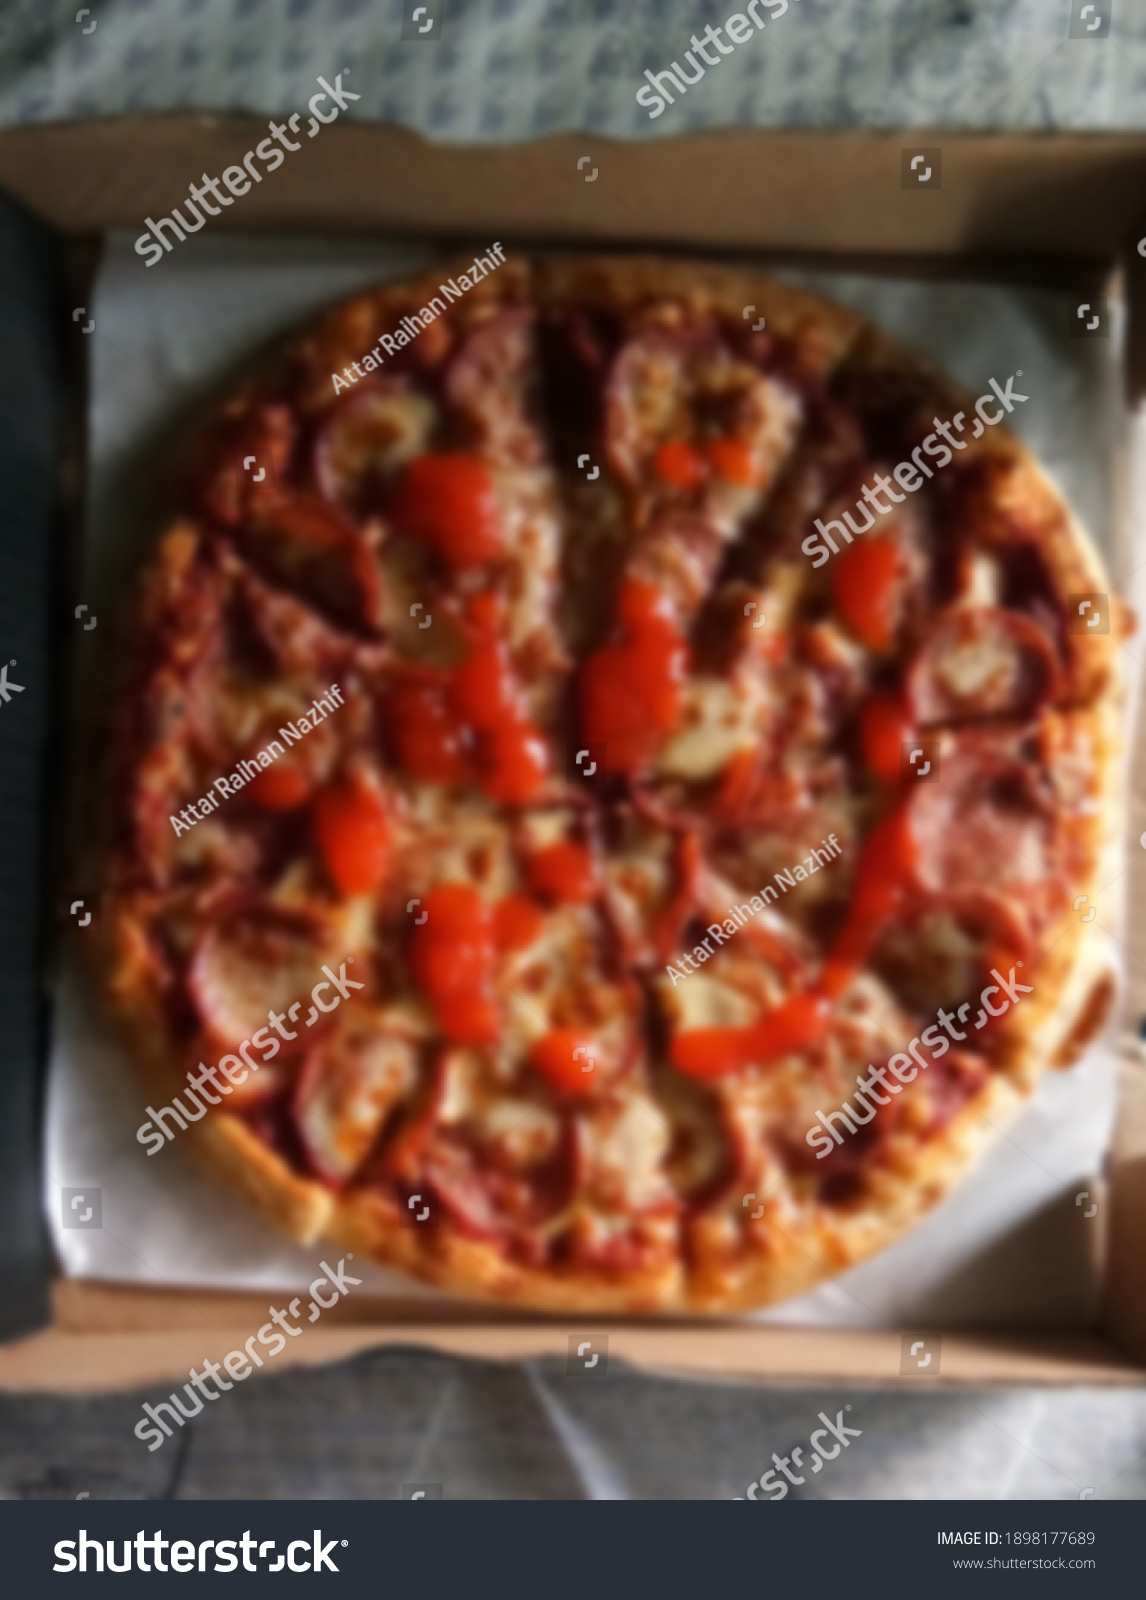 A blurred image of a pepperoni pizza #1898177689